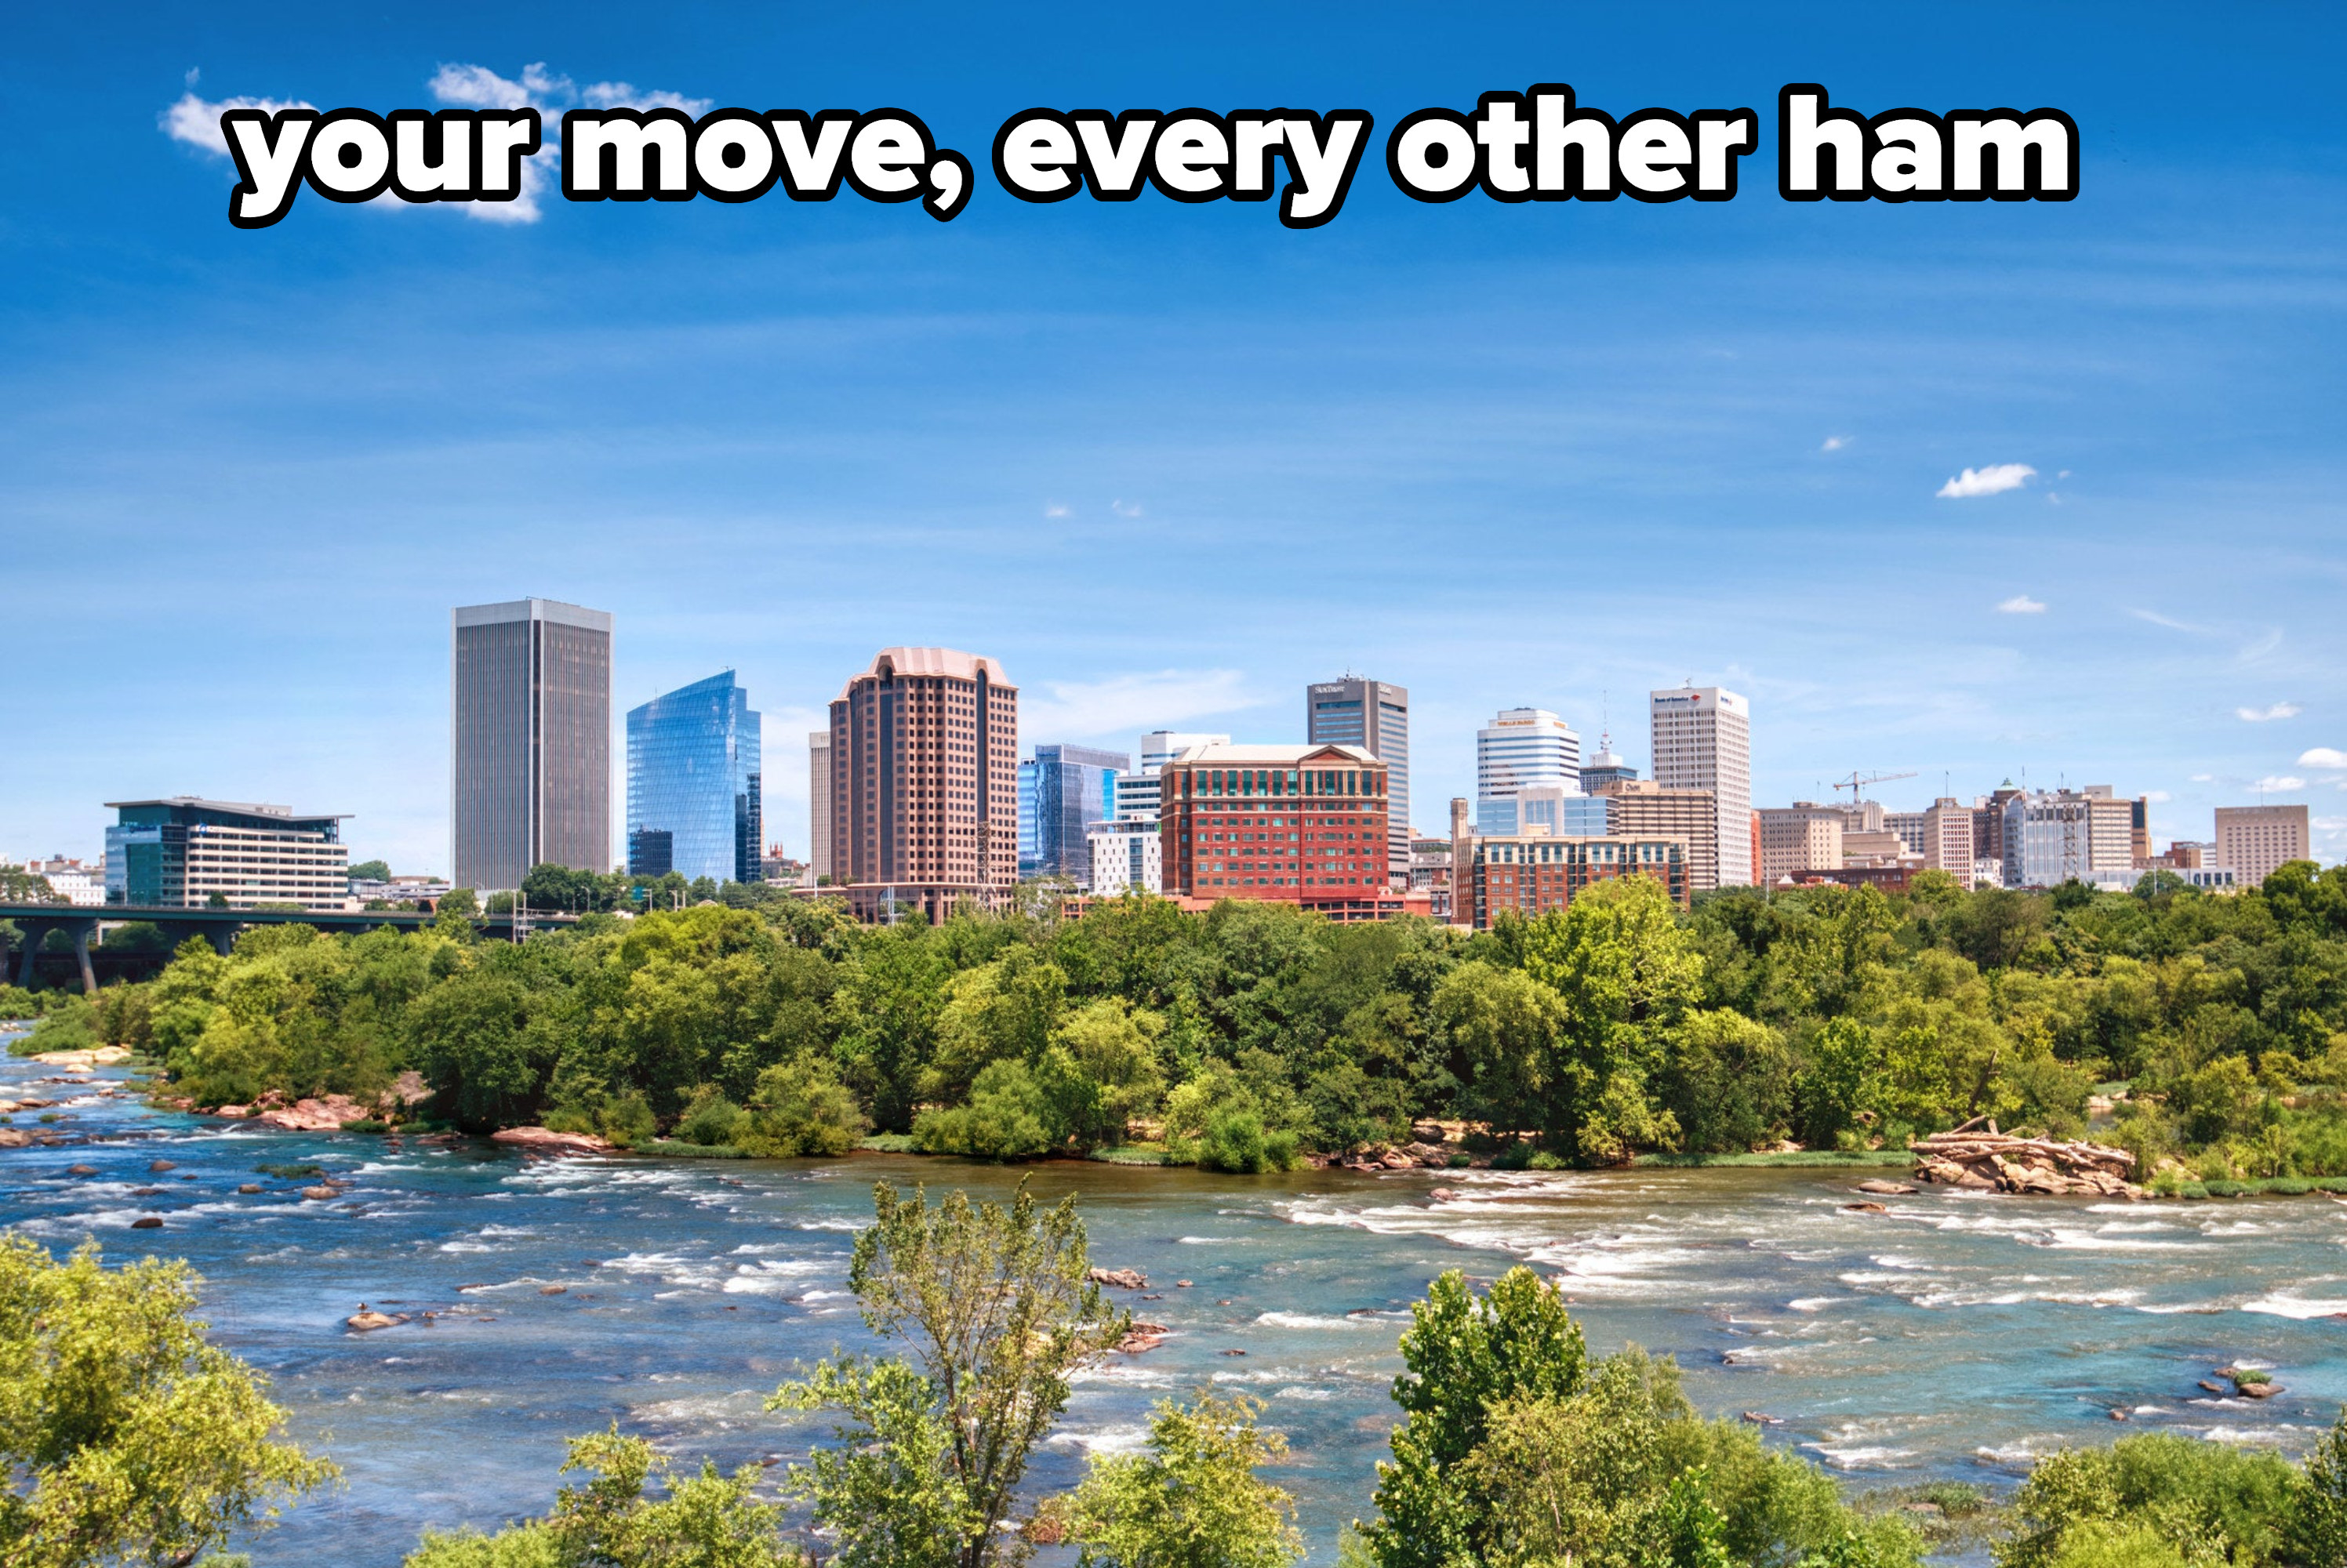 the skyline of Richmond Virginia, with caption: your move, every other ham